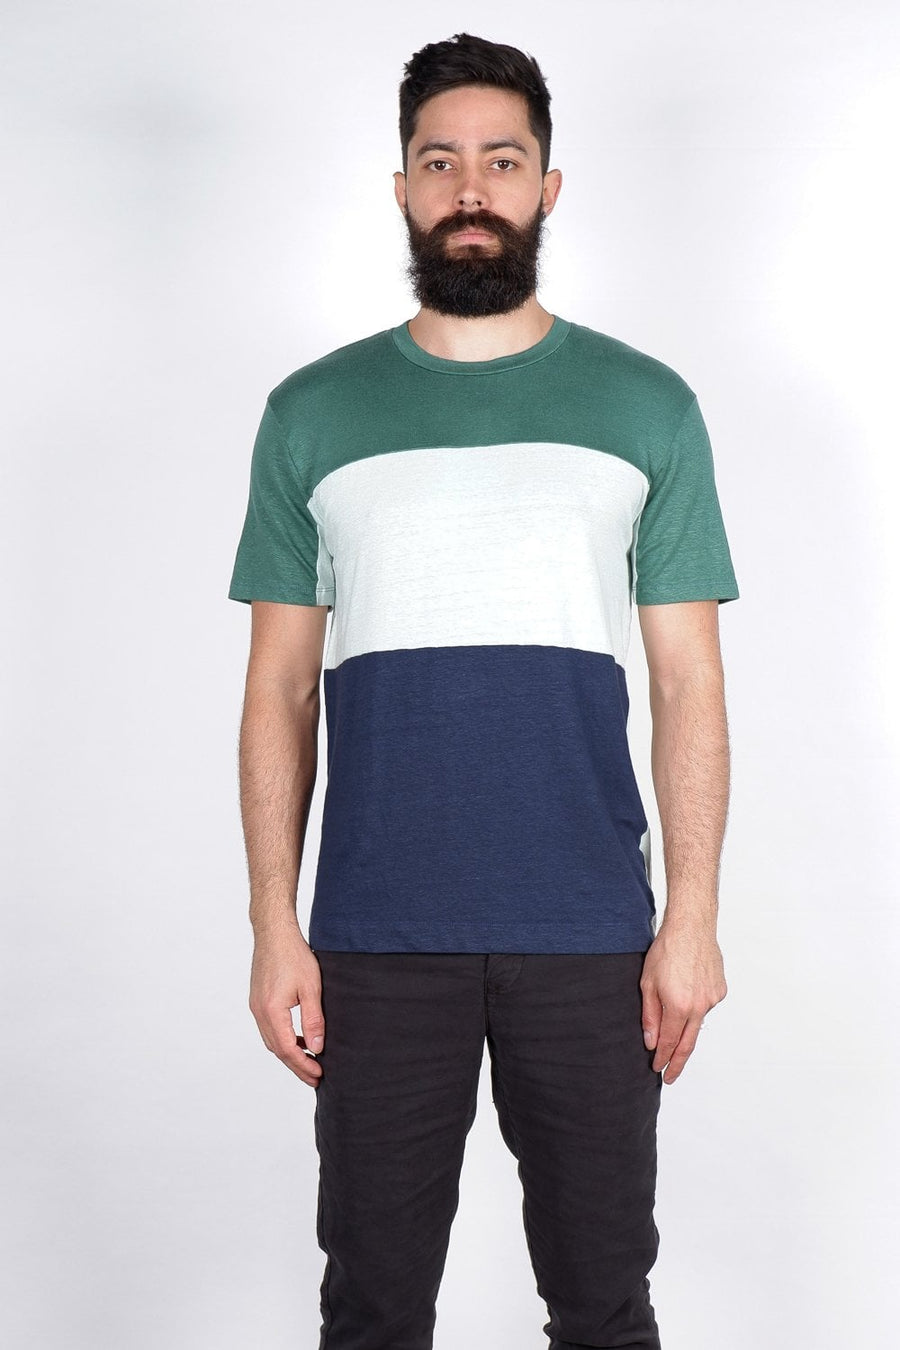 Buy the Daniele Fiesoli Block Stripe TShirt Green/Navy at Intro. Spend £50 for free UK delivery. Official stockists. We ship worldwide.